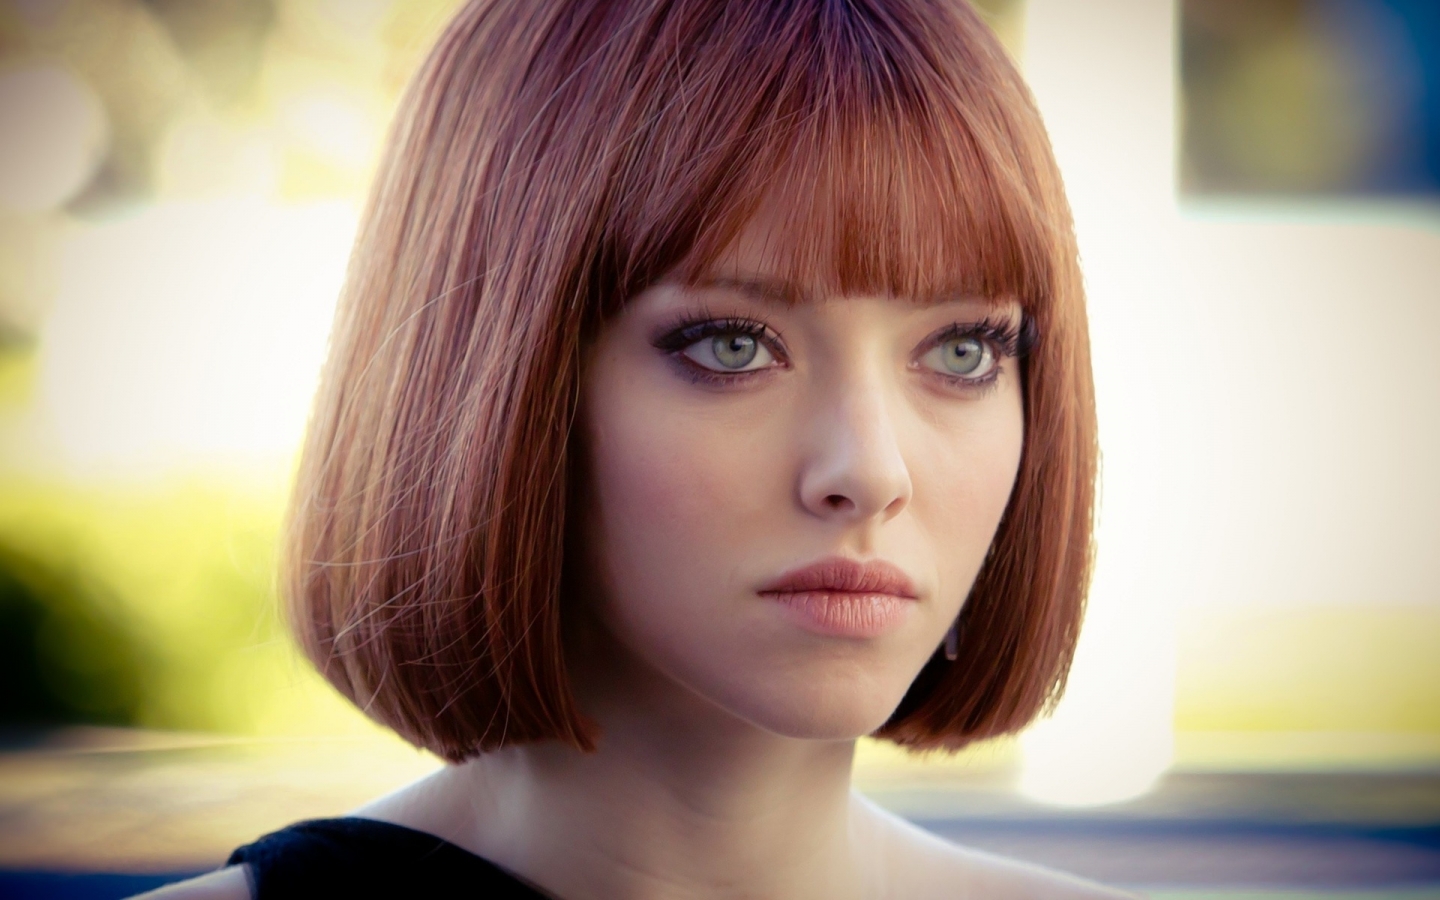 Amanda Seyfried In Time for 1440 x 900 widescreen resolution